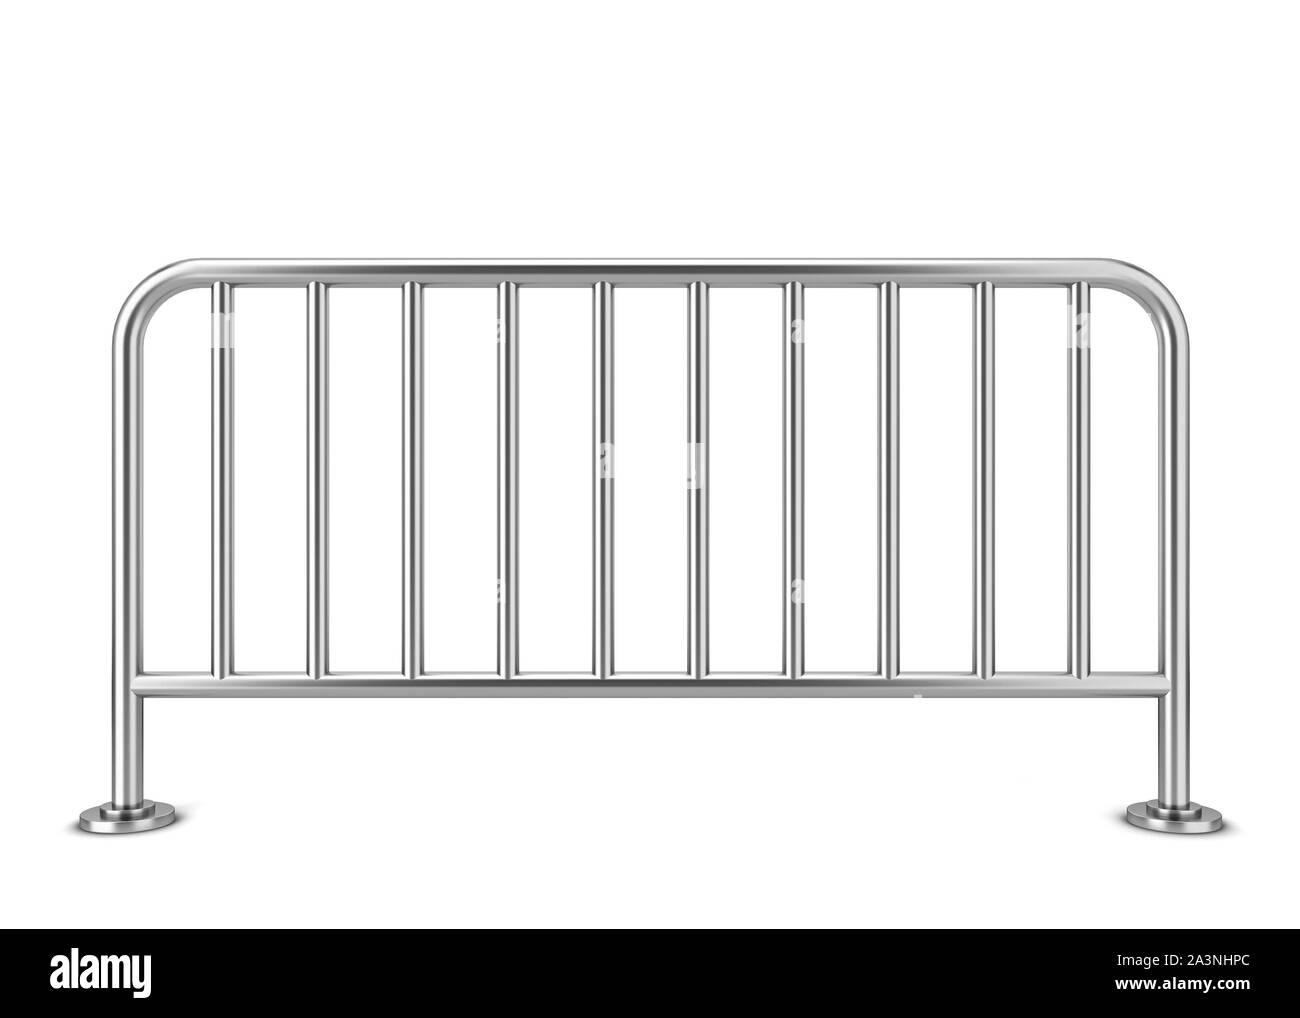 Metal barrier. 3d illustration isolated on white background Stock Photo